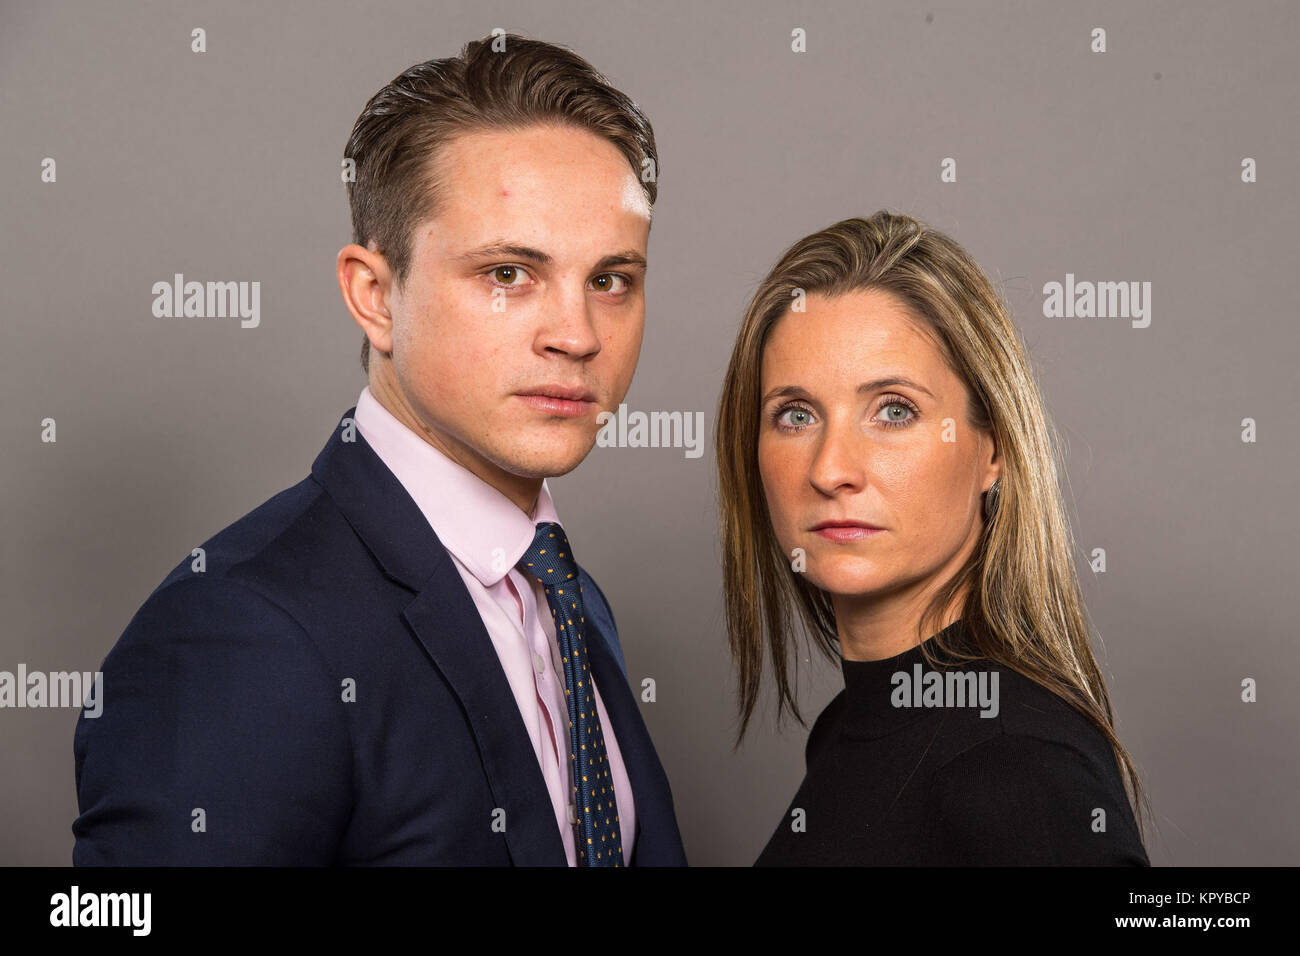 The Apprentice finalists James White and Sarah Lynn, who will fight it out to win Lord Sugar's investment during the final on Sunday December 17, due to be aired from 9pm on BBC One. Stock Photo